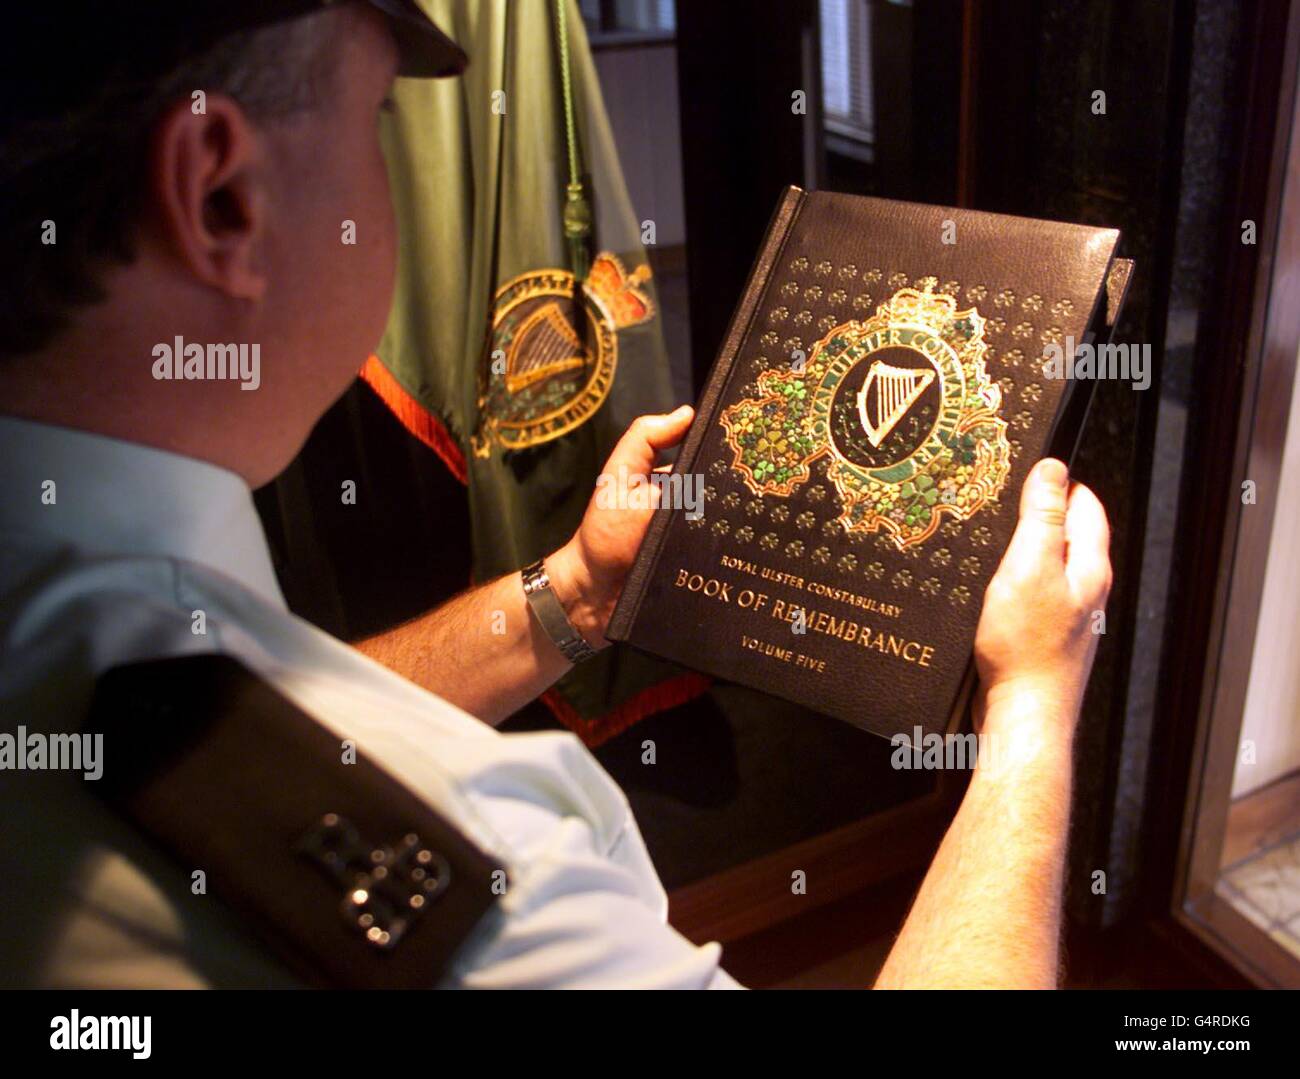 A RUC (Royal Ulster Constabulary) man looks over the police book of remembrance at RUC headquarters Belfast, which contains the names of officers killed in the line of duty. The last entry was of constable John Graham, killed in Lurgan by the IRA in 1997. Stock Photo